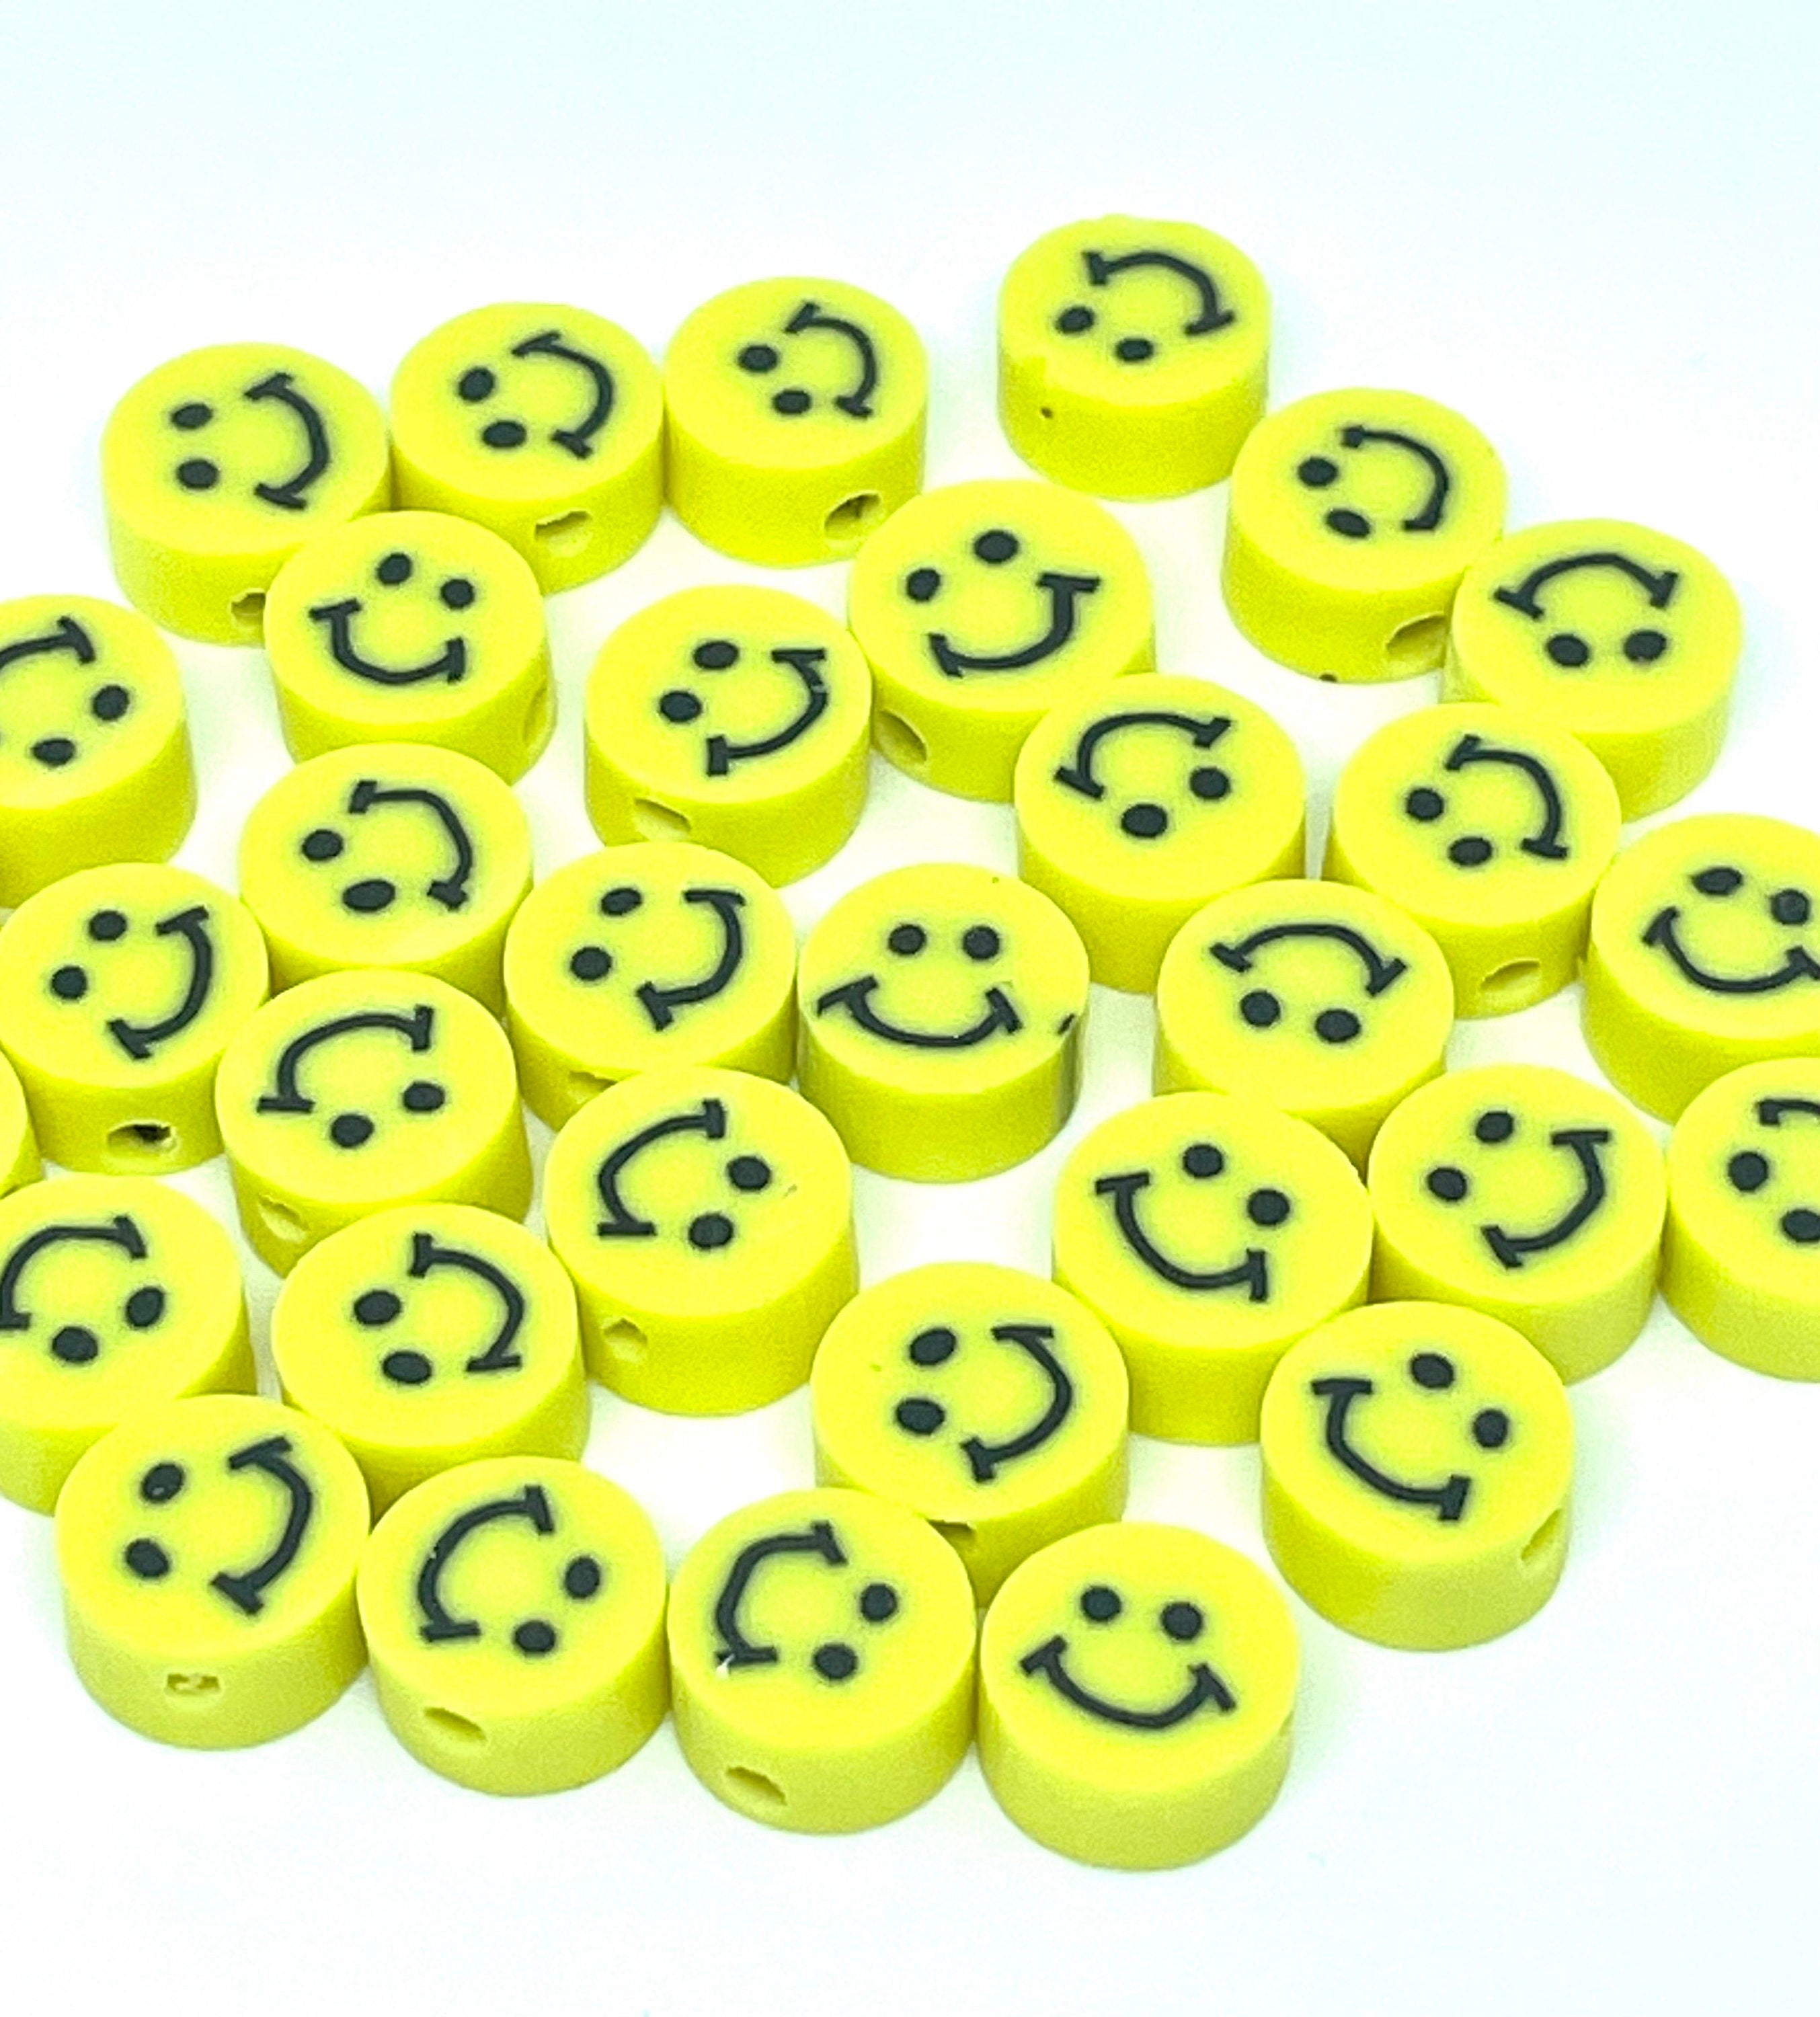 Cute Flower Beads, Smiley Face Flower Beads for Jewelry Making